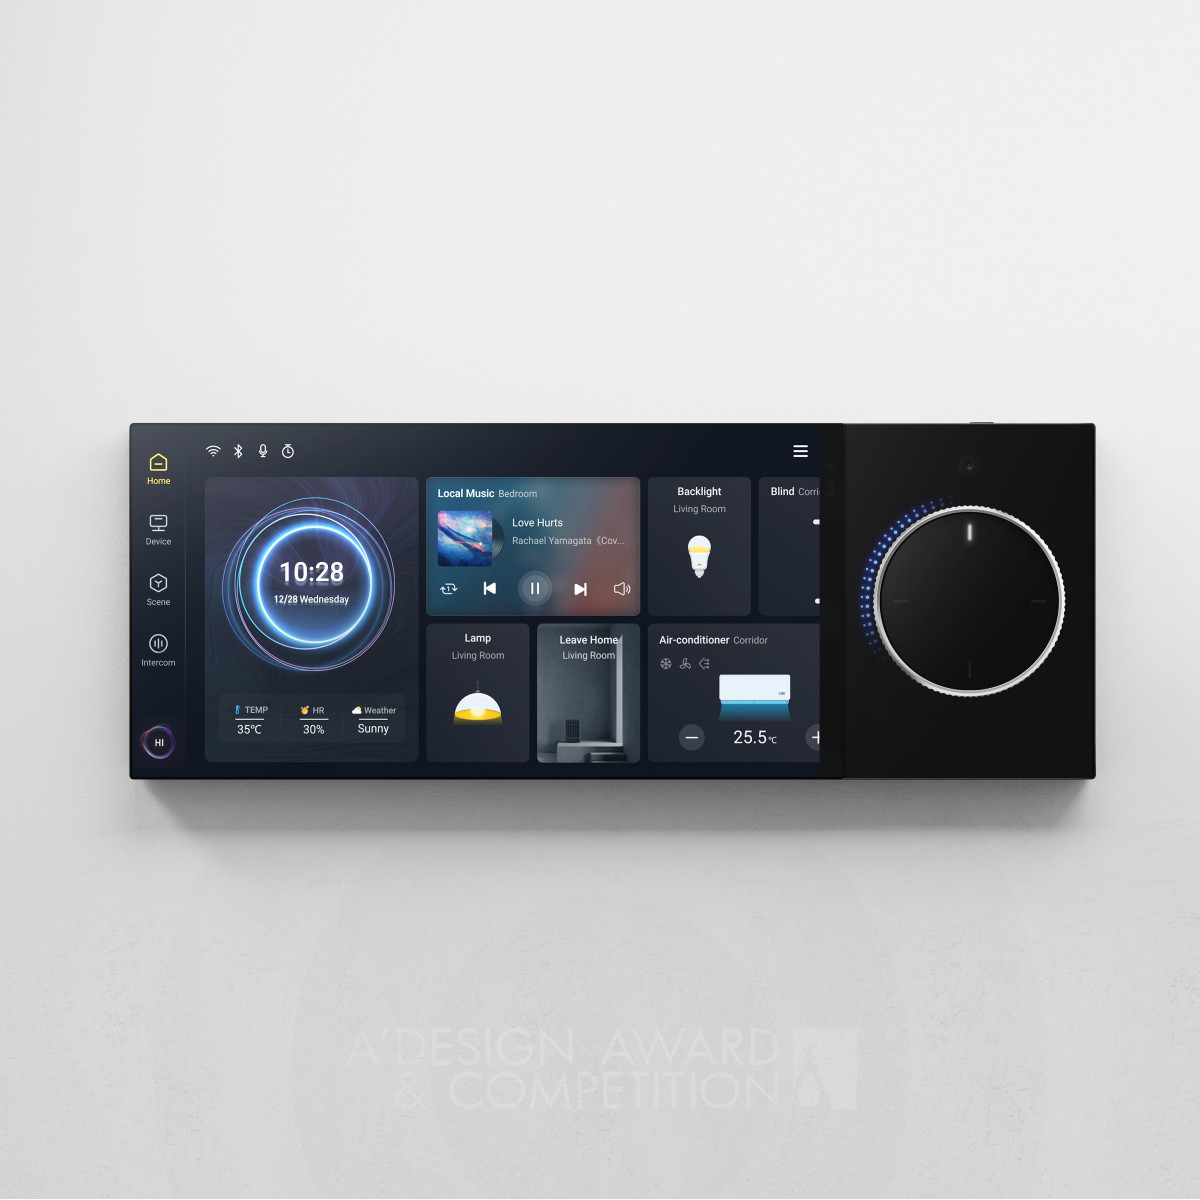 Smart Touch S7 Series: A New Era of Smart Home Control